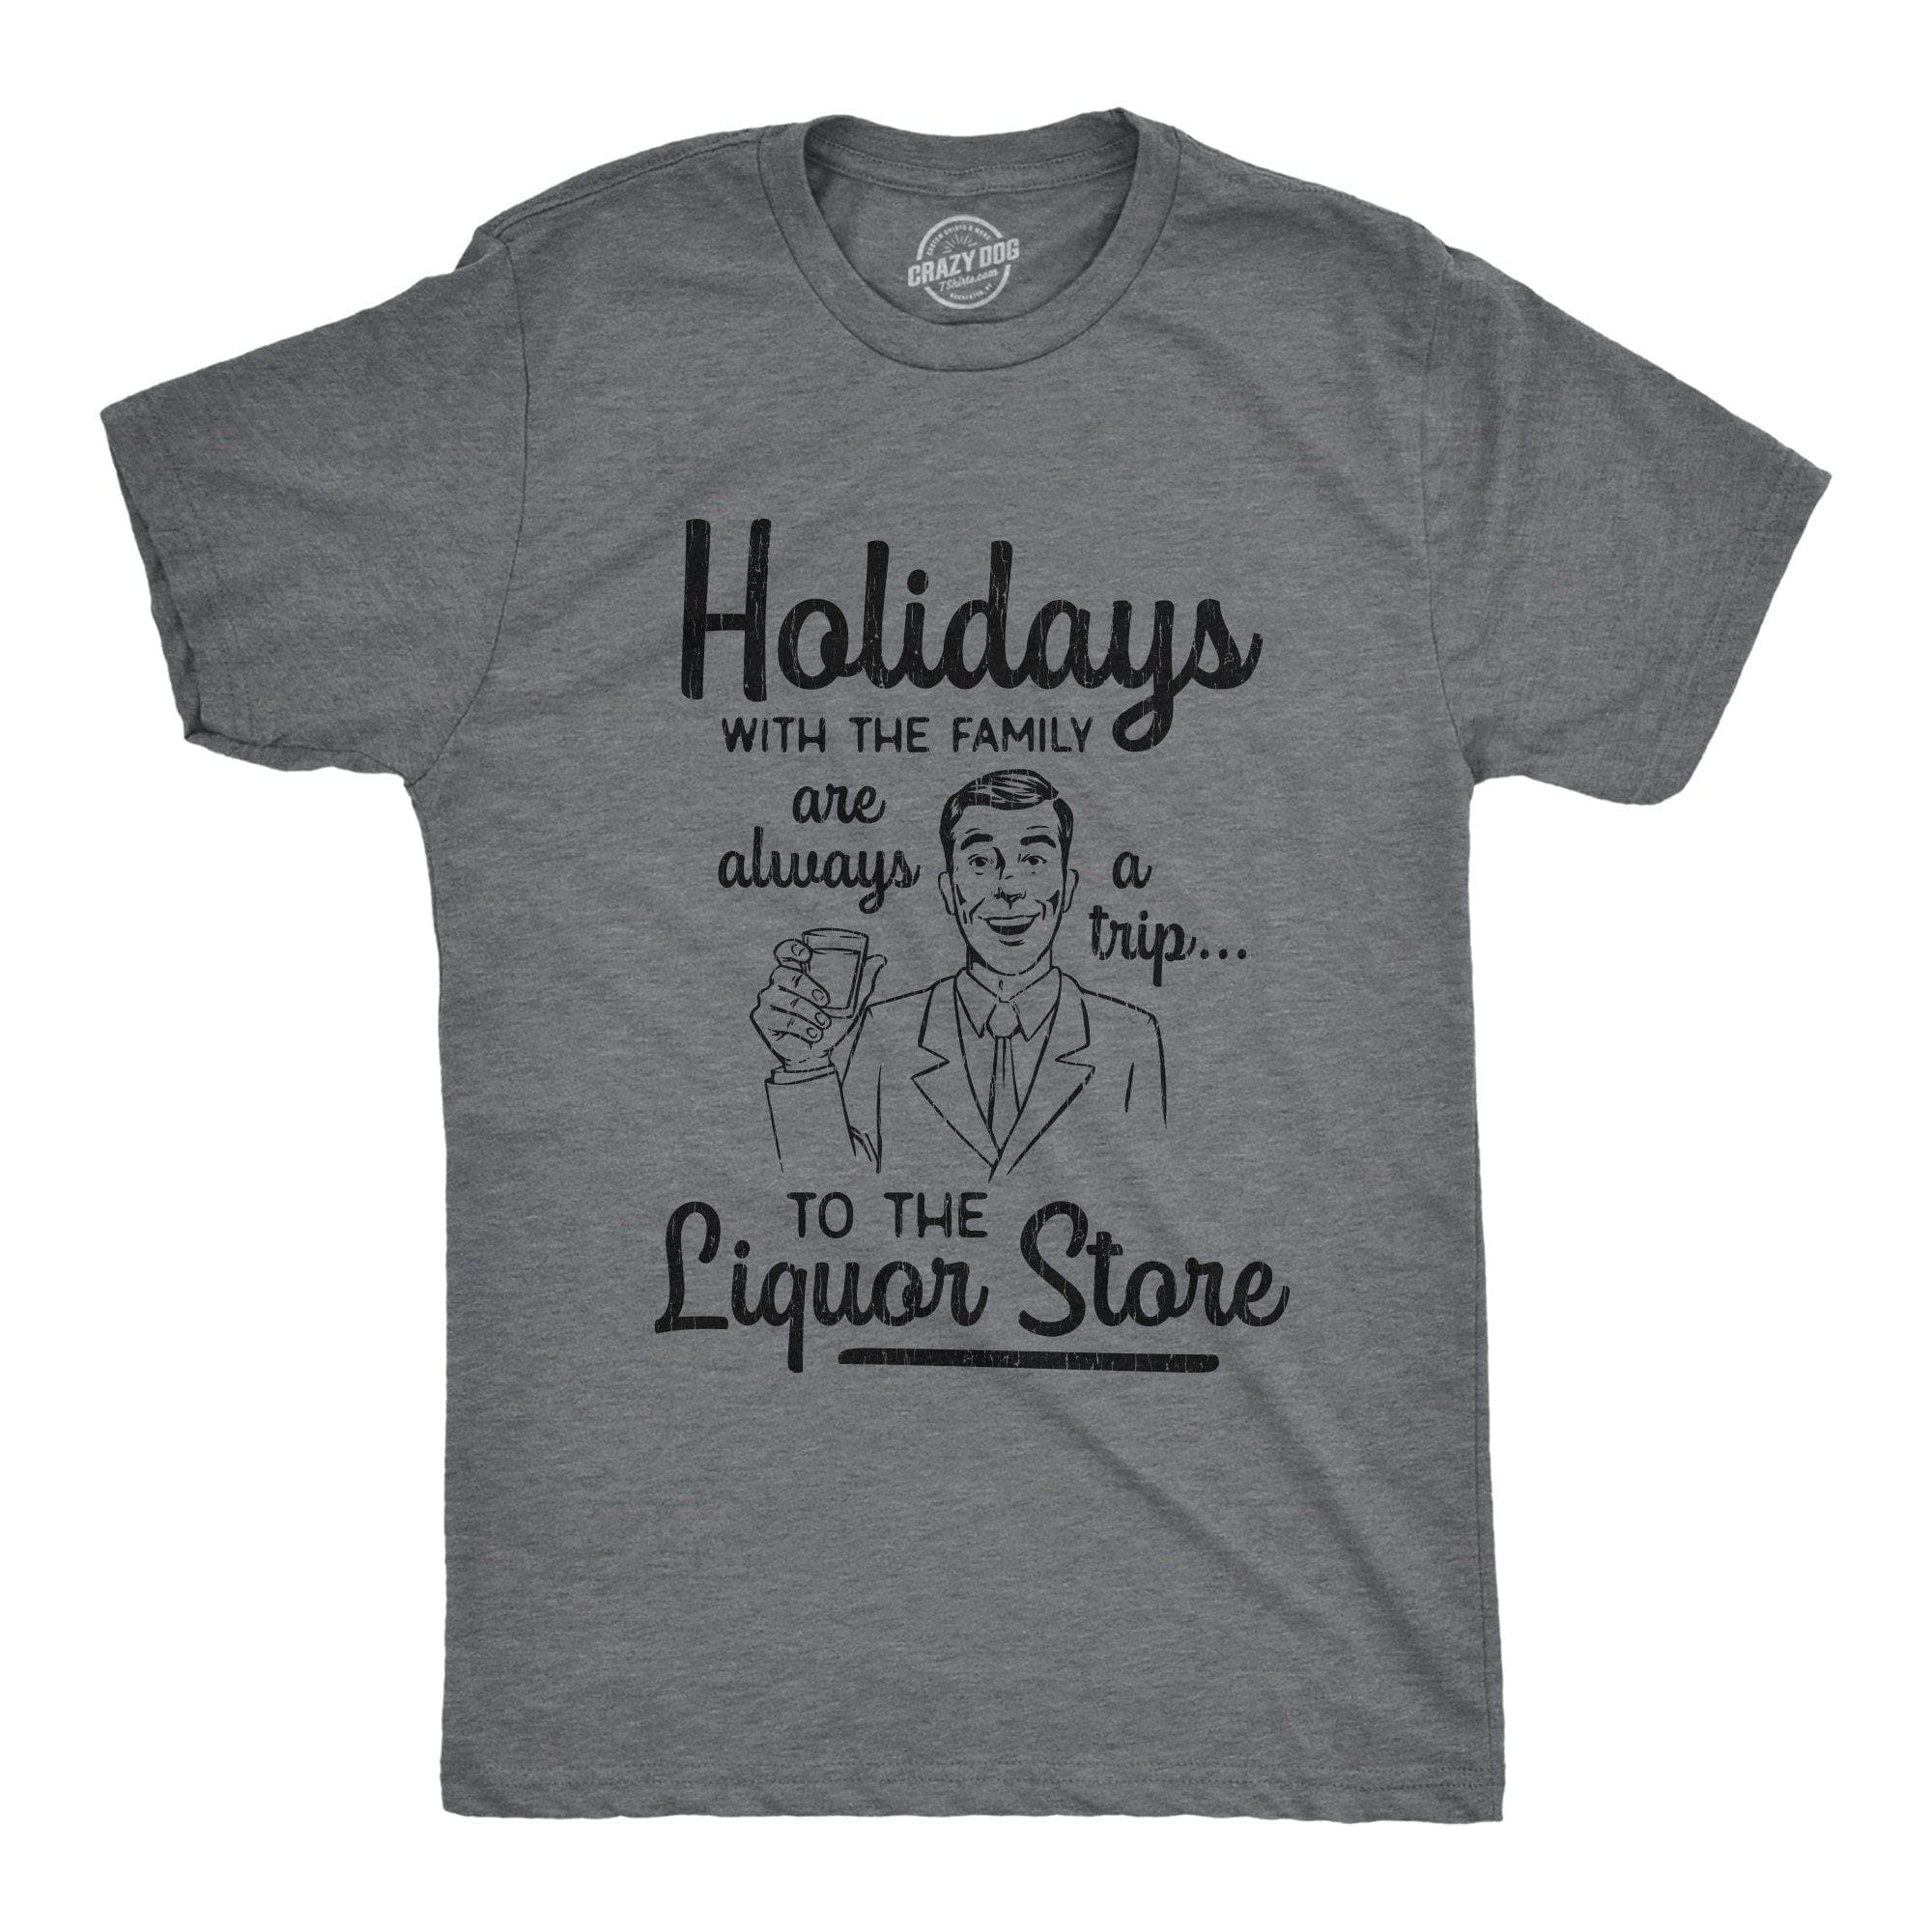 Holidays With The Family Are Always A Trip To The Liquor Store Men's Tshirt - Crazy Dog T-Shirts